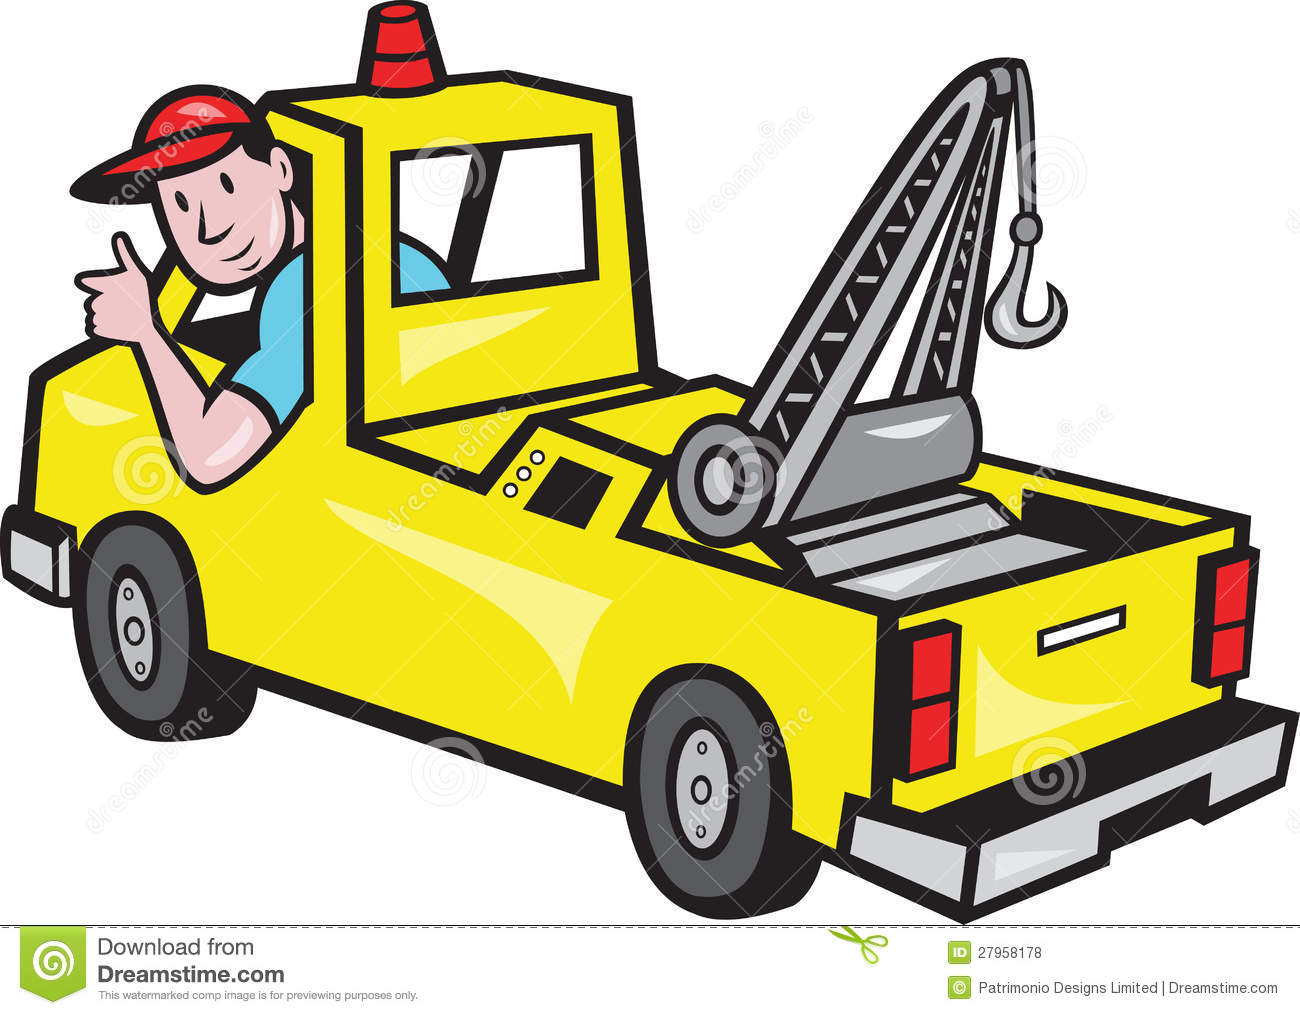 Tow Wrecker Truck Driver Thumbs Up Royalty Free Stock Photos   Image    